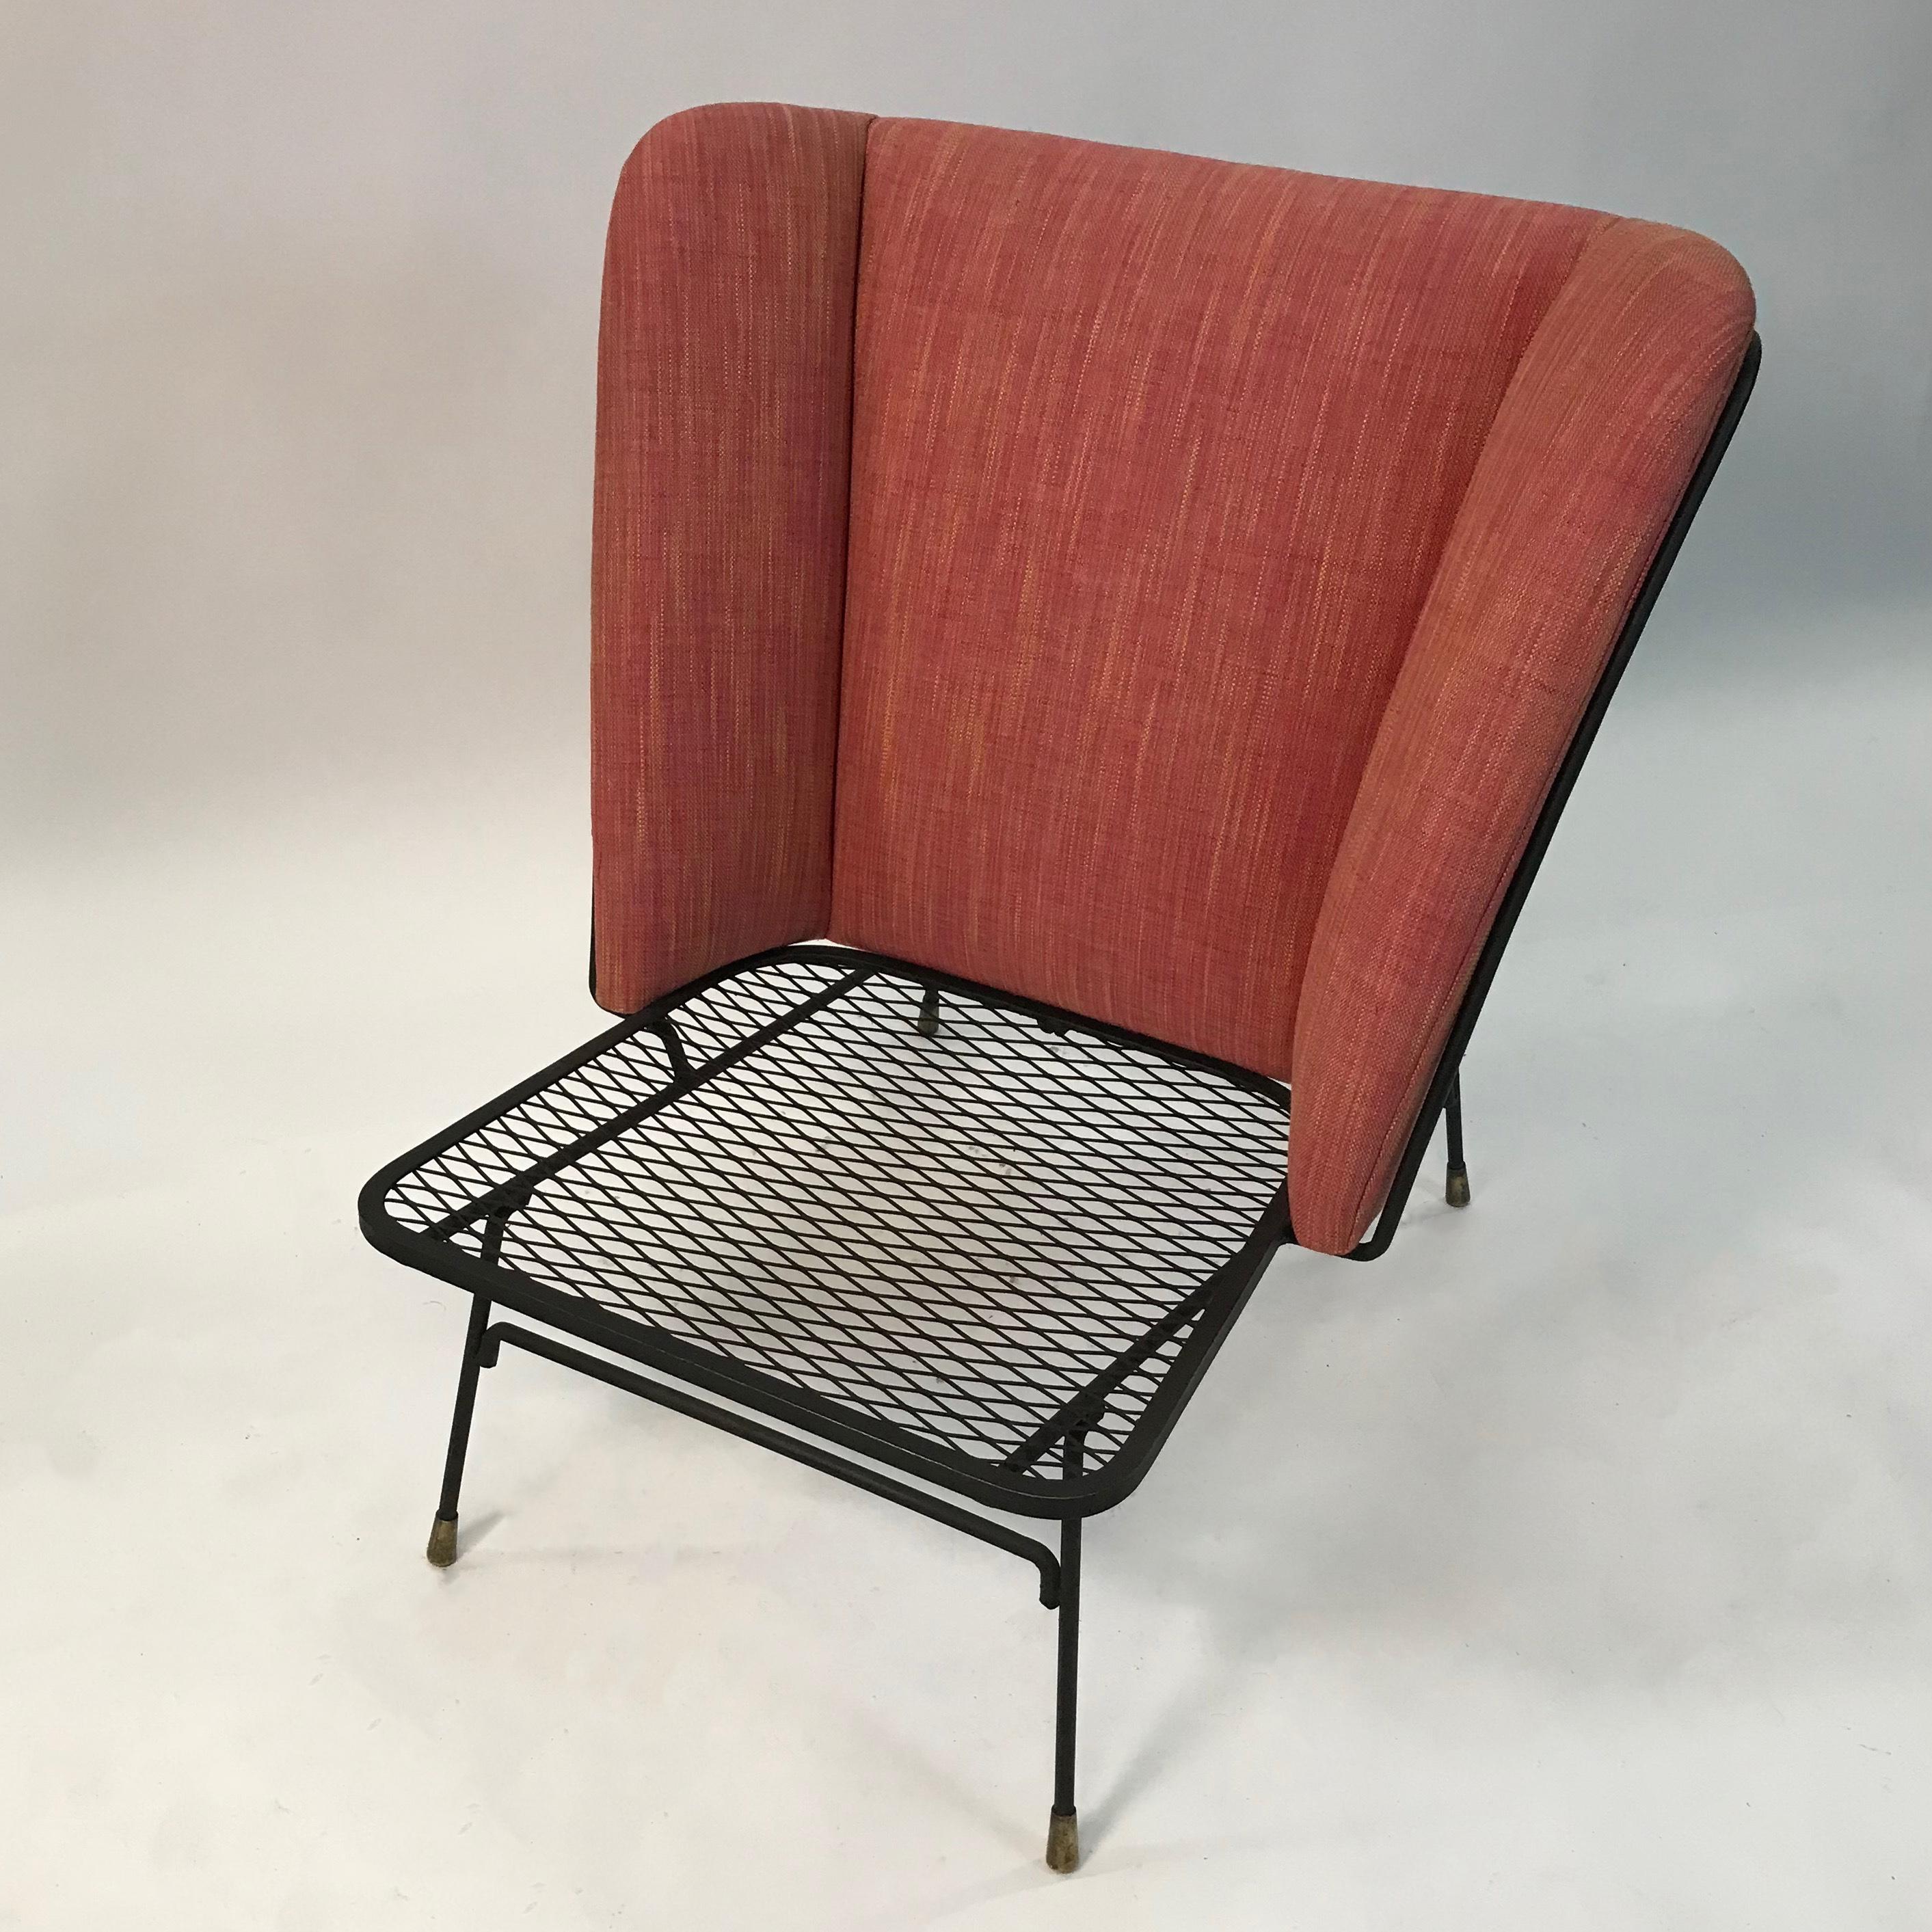 20th Century Mid-Century Modern Wrought Iron Upholstered Wingback Chair For Sale